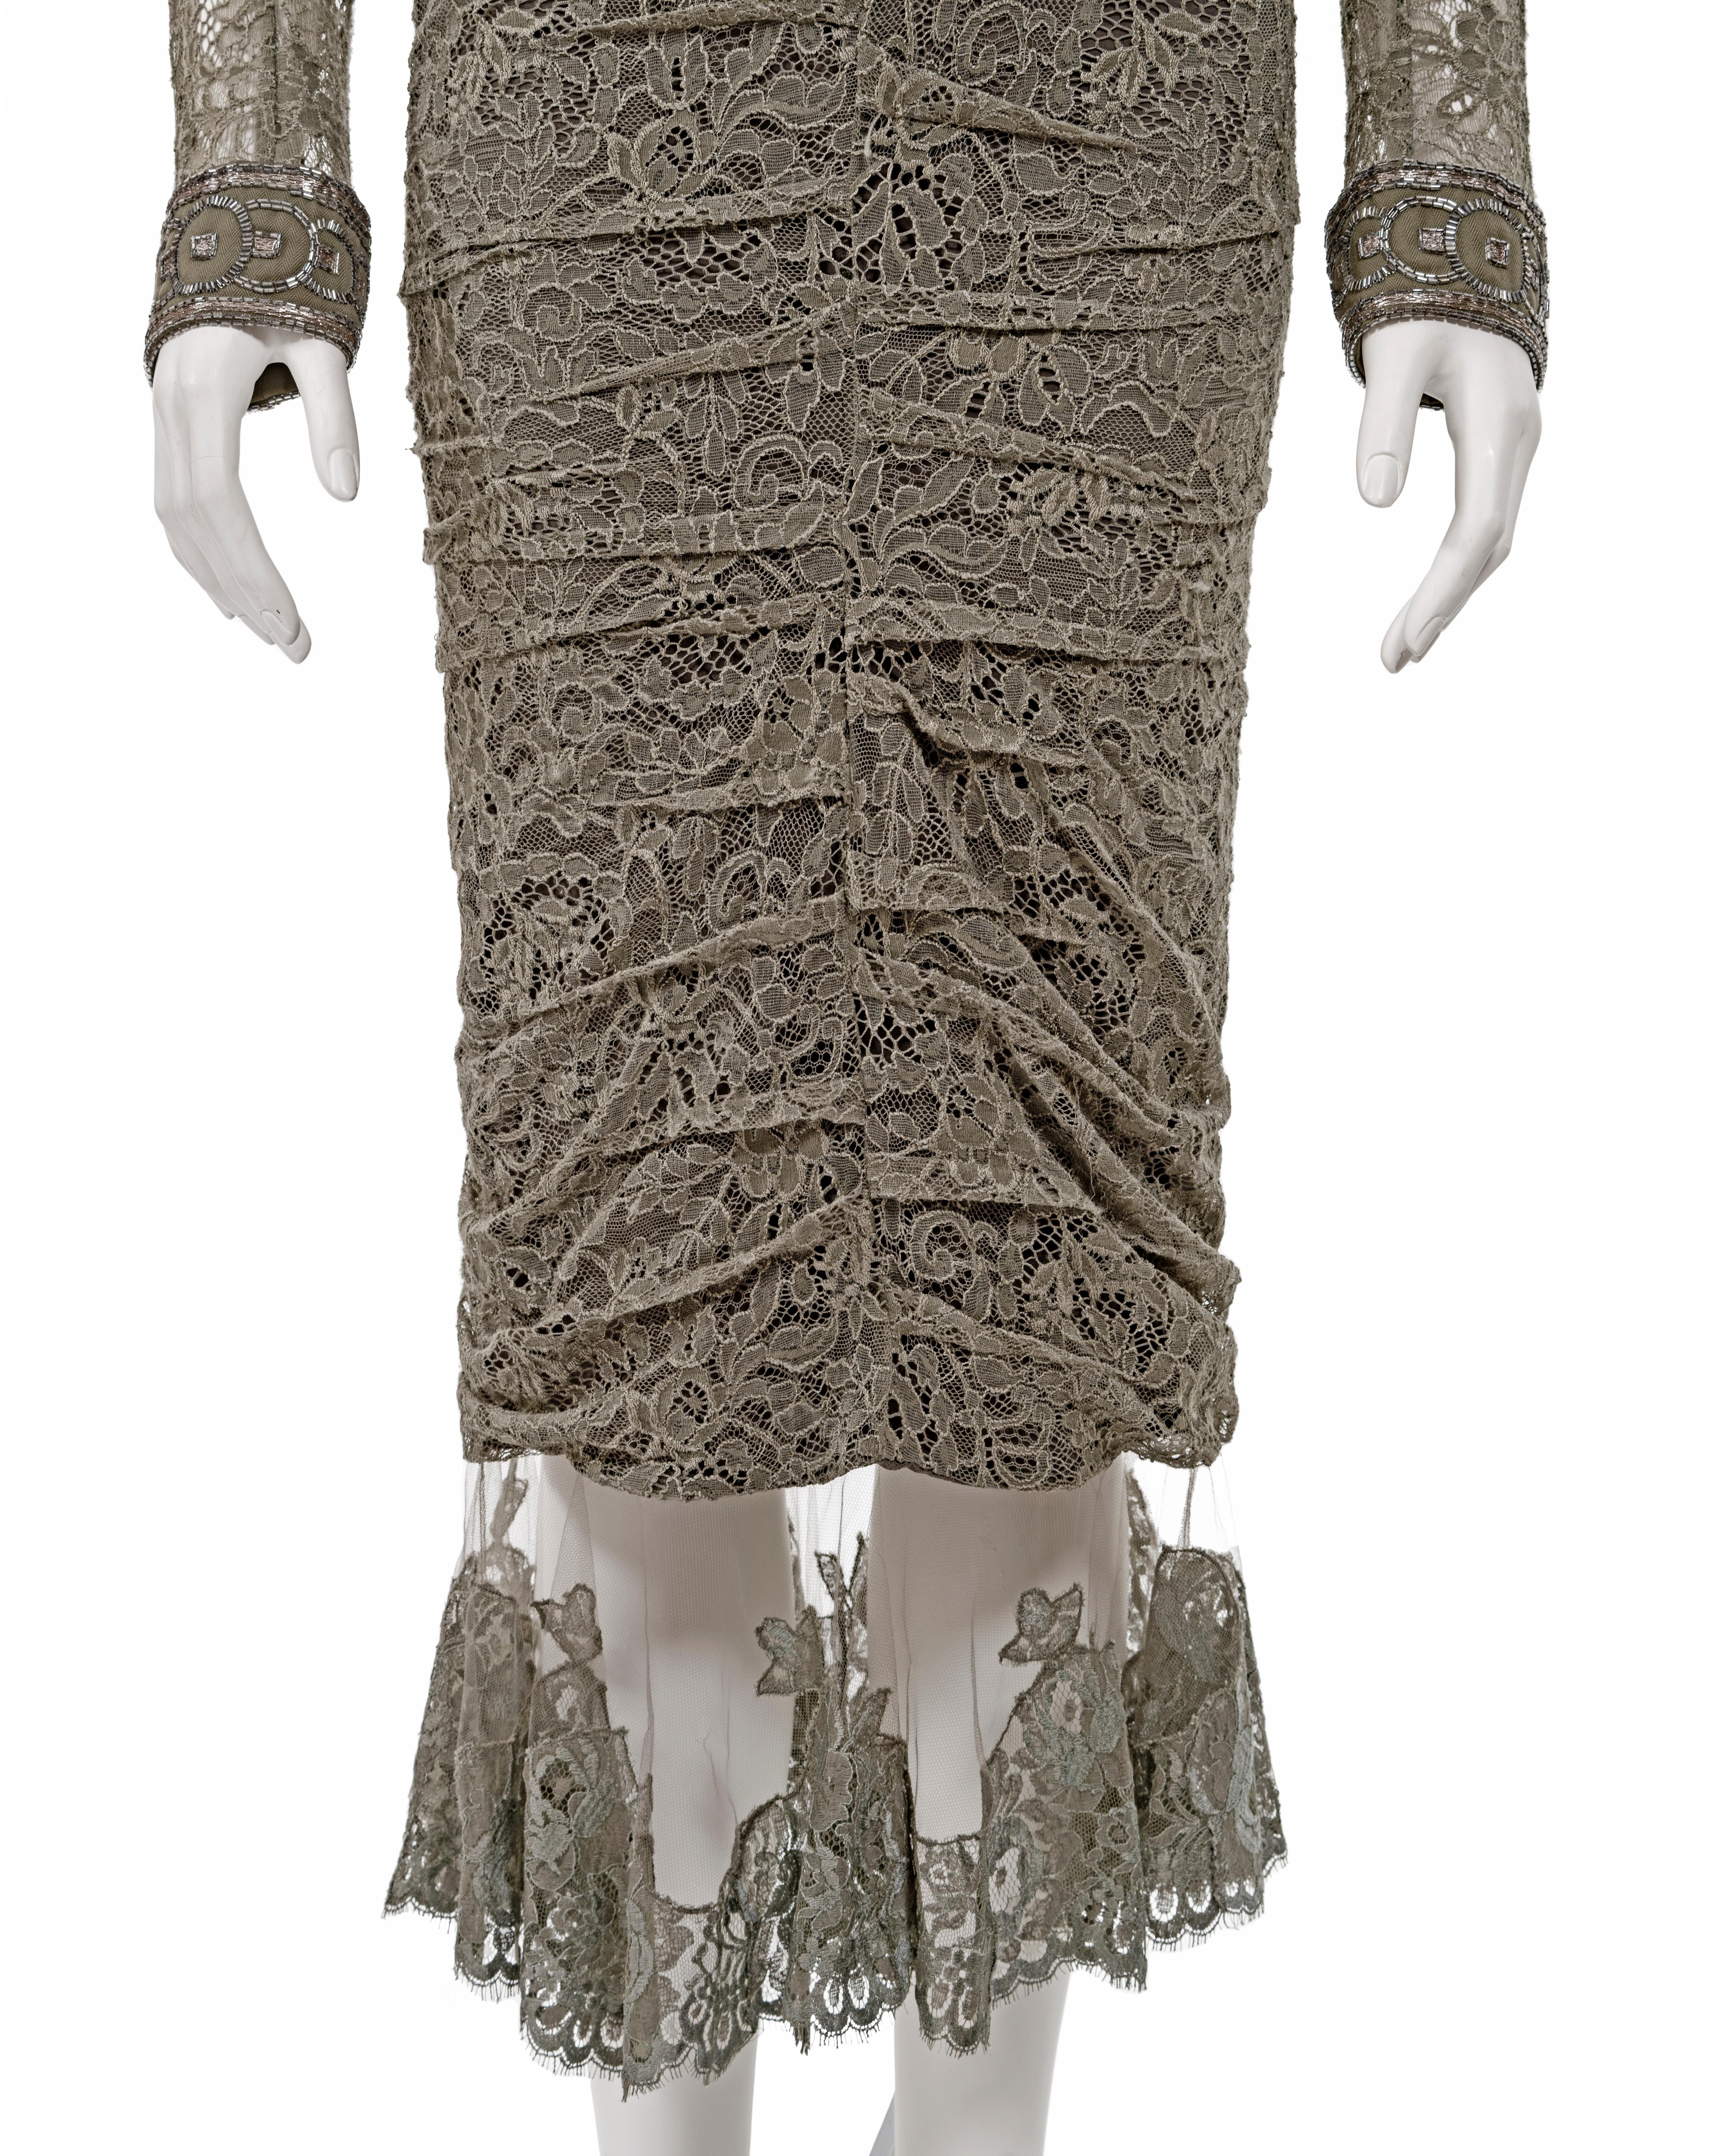 Women's Christian Dior by John Galliano green lace beaded skirt suit, fw 2003 For Sale